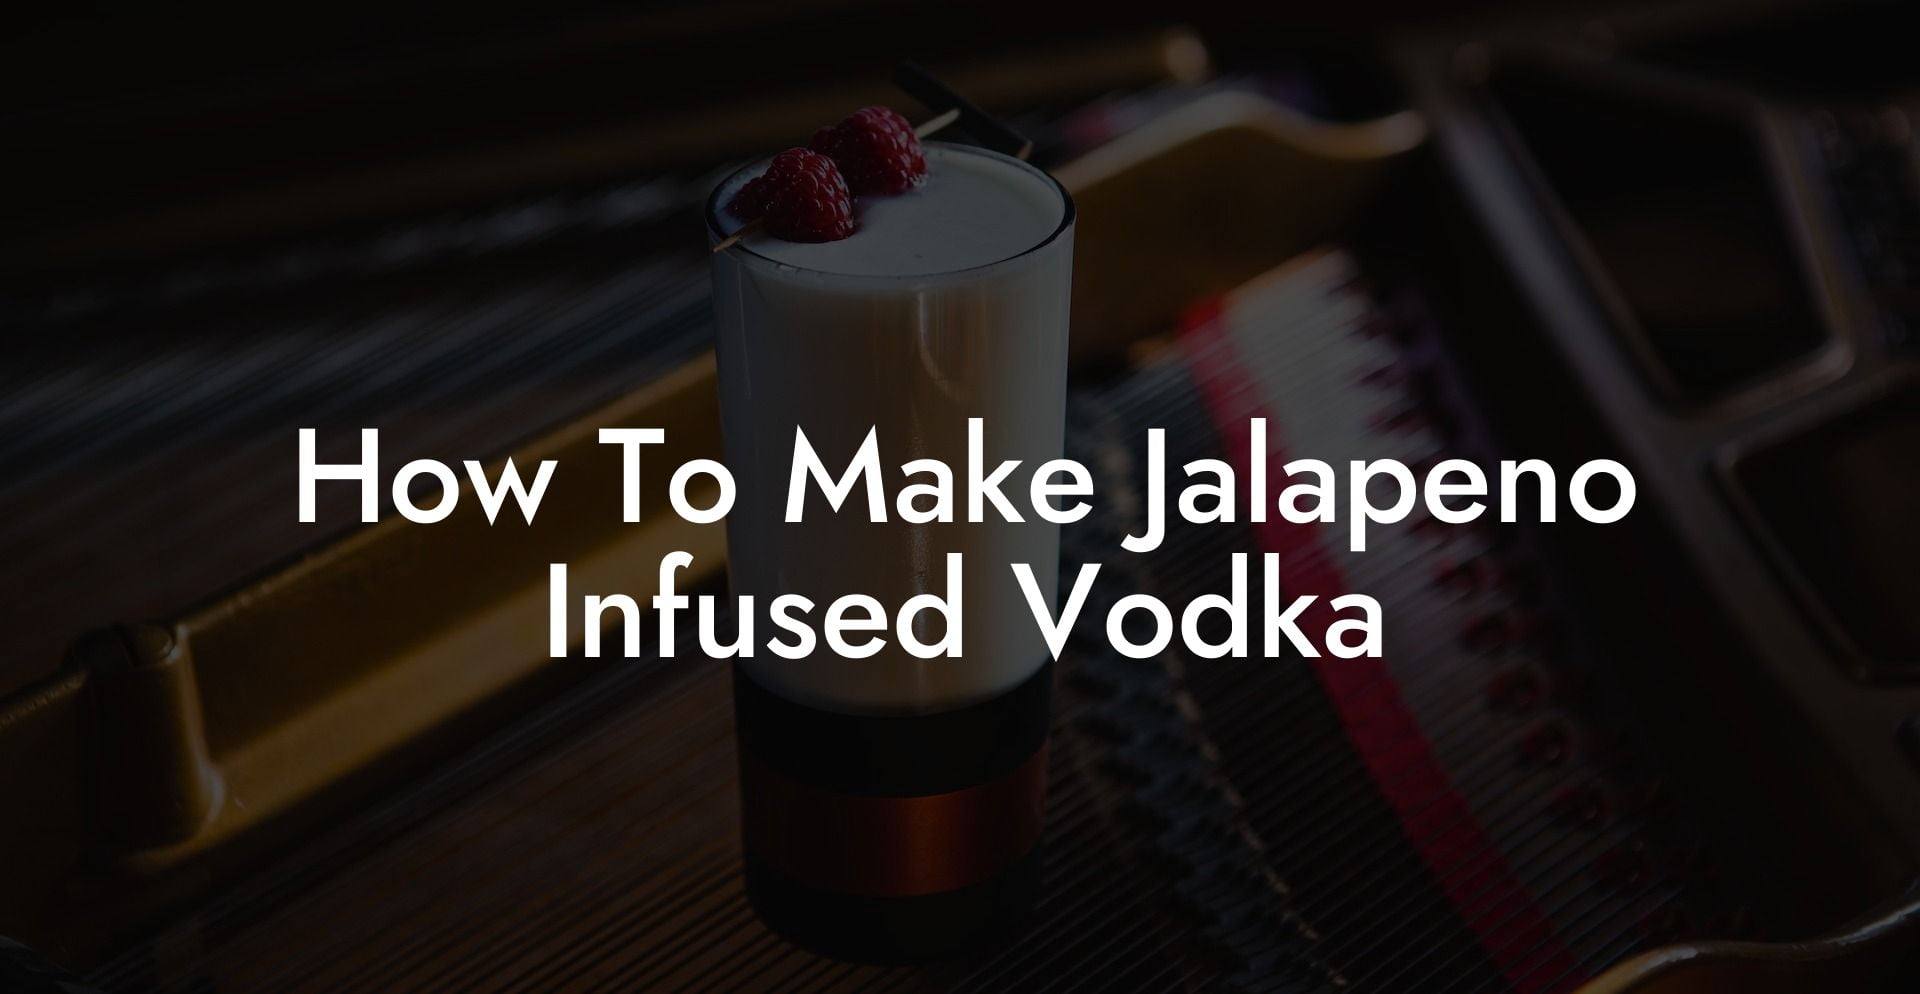 How To Make Jalapeno Infused Vodka